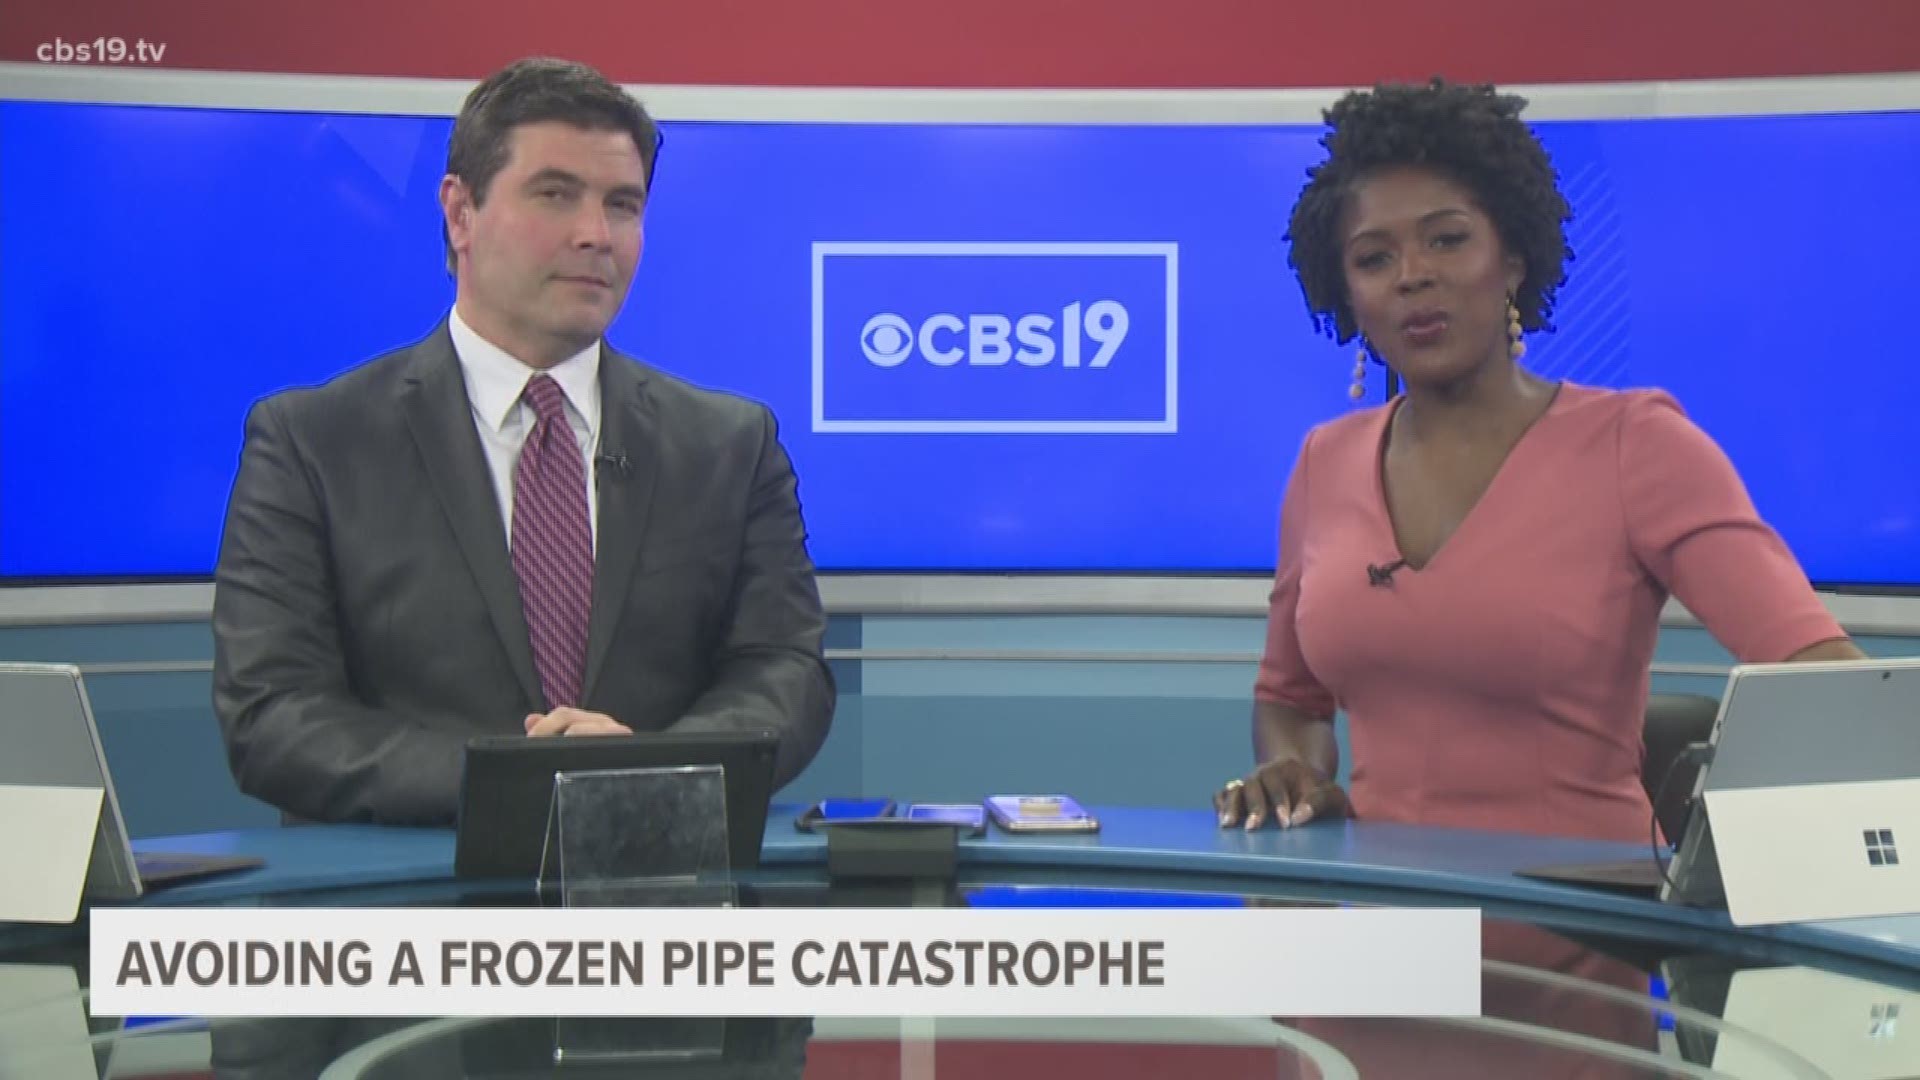 CBS19's Bryan Boes tells you how you can protect your pipes this winter.